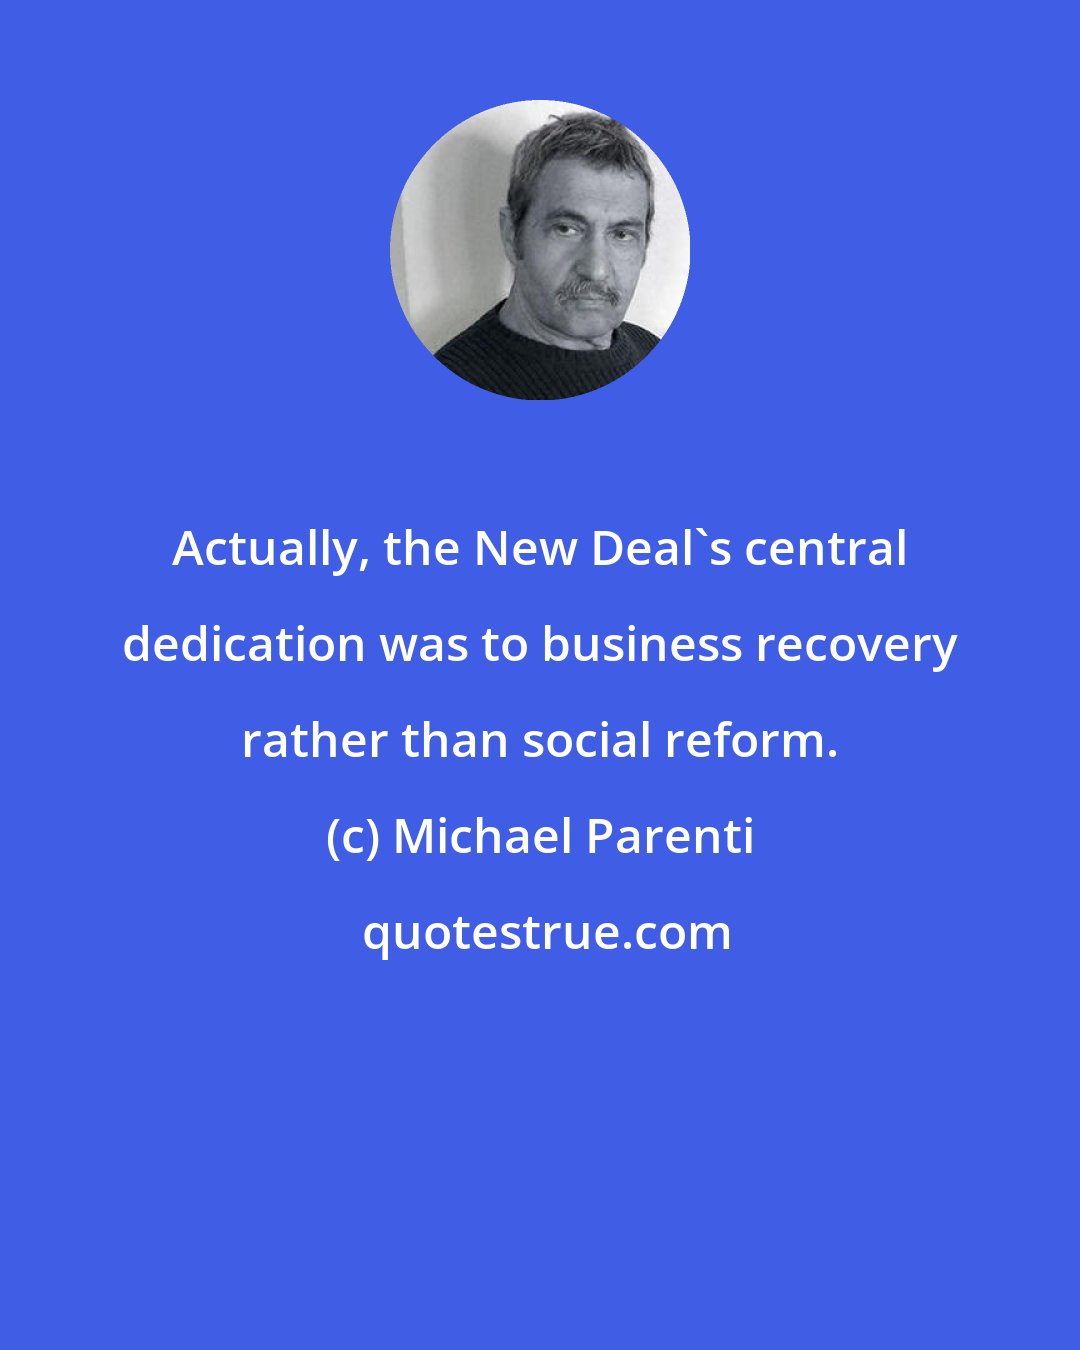 Michael Parenti: Actually, the New Deal's central dedication was to business recovery rather than social reform.